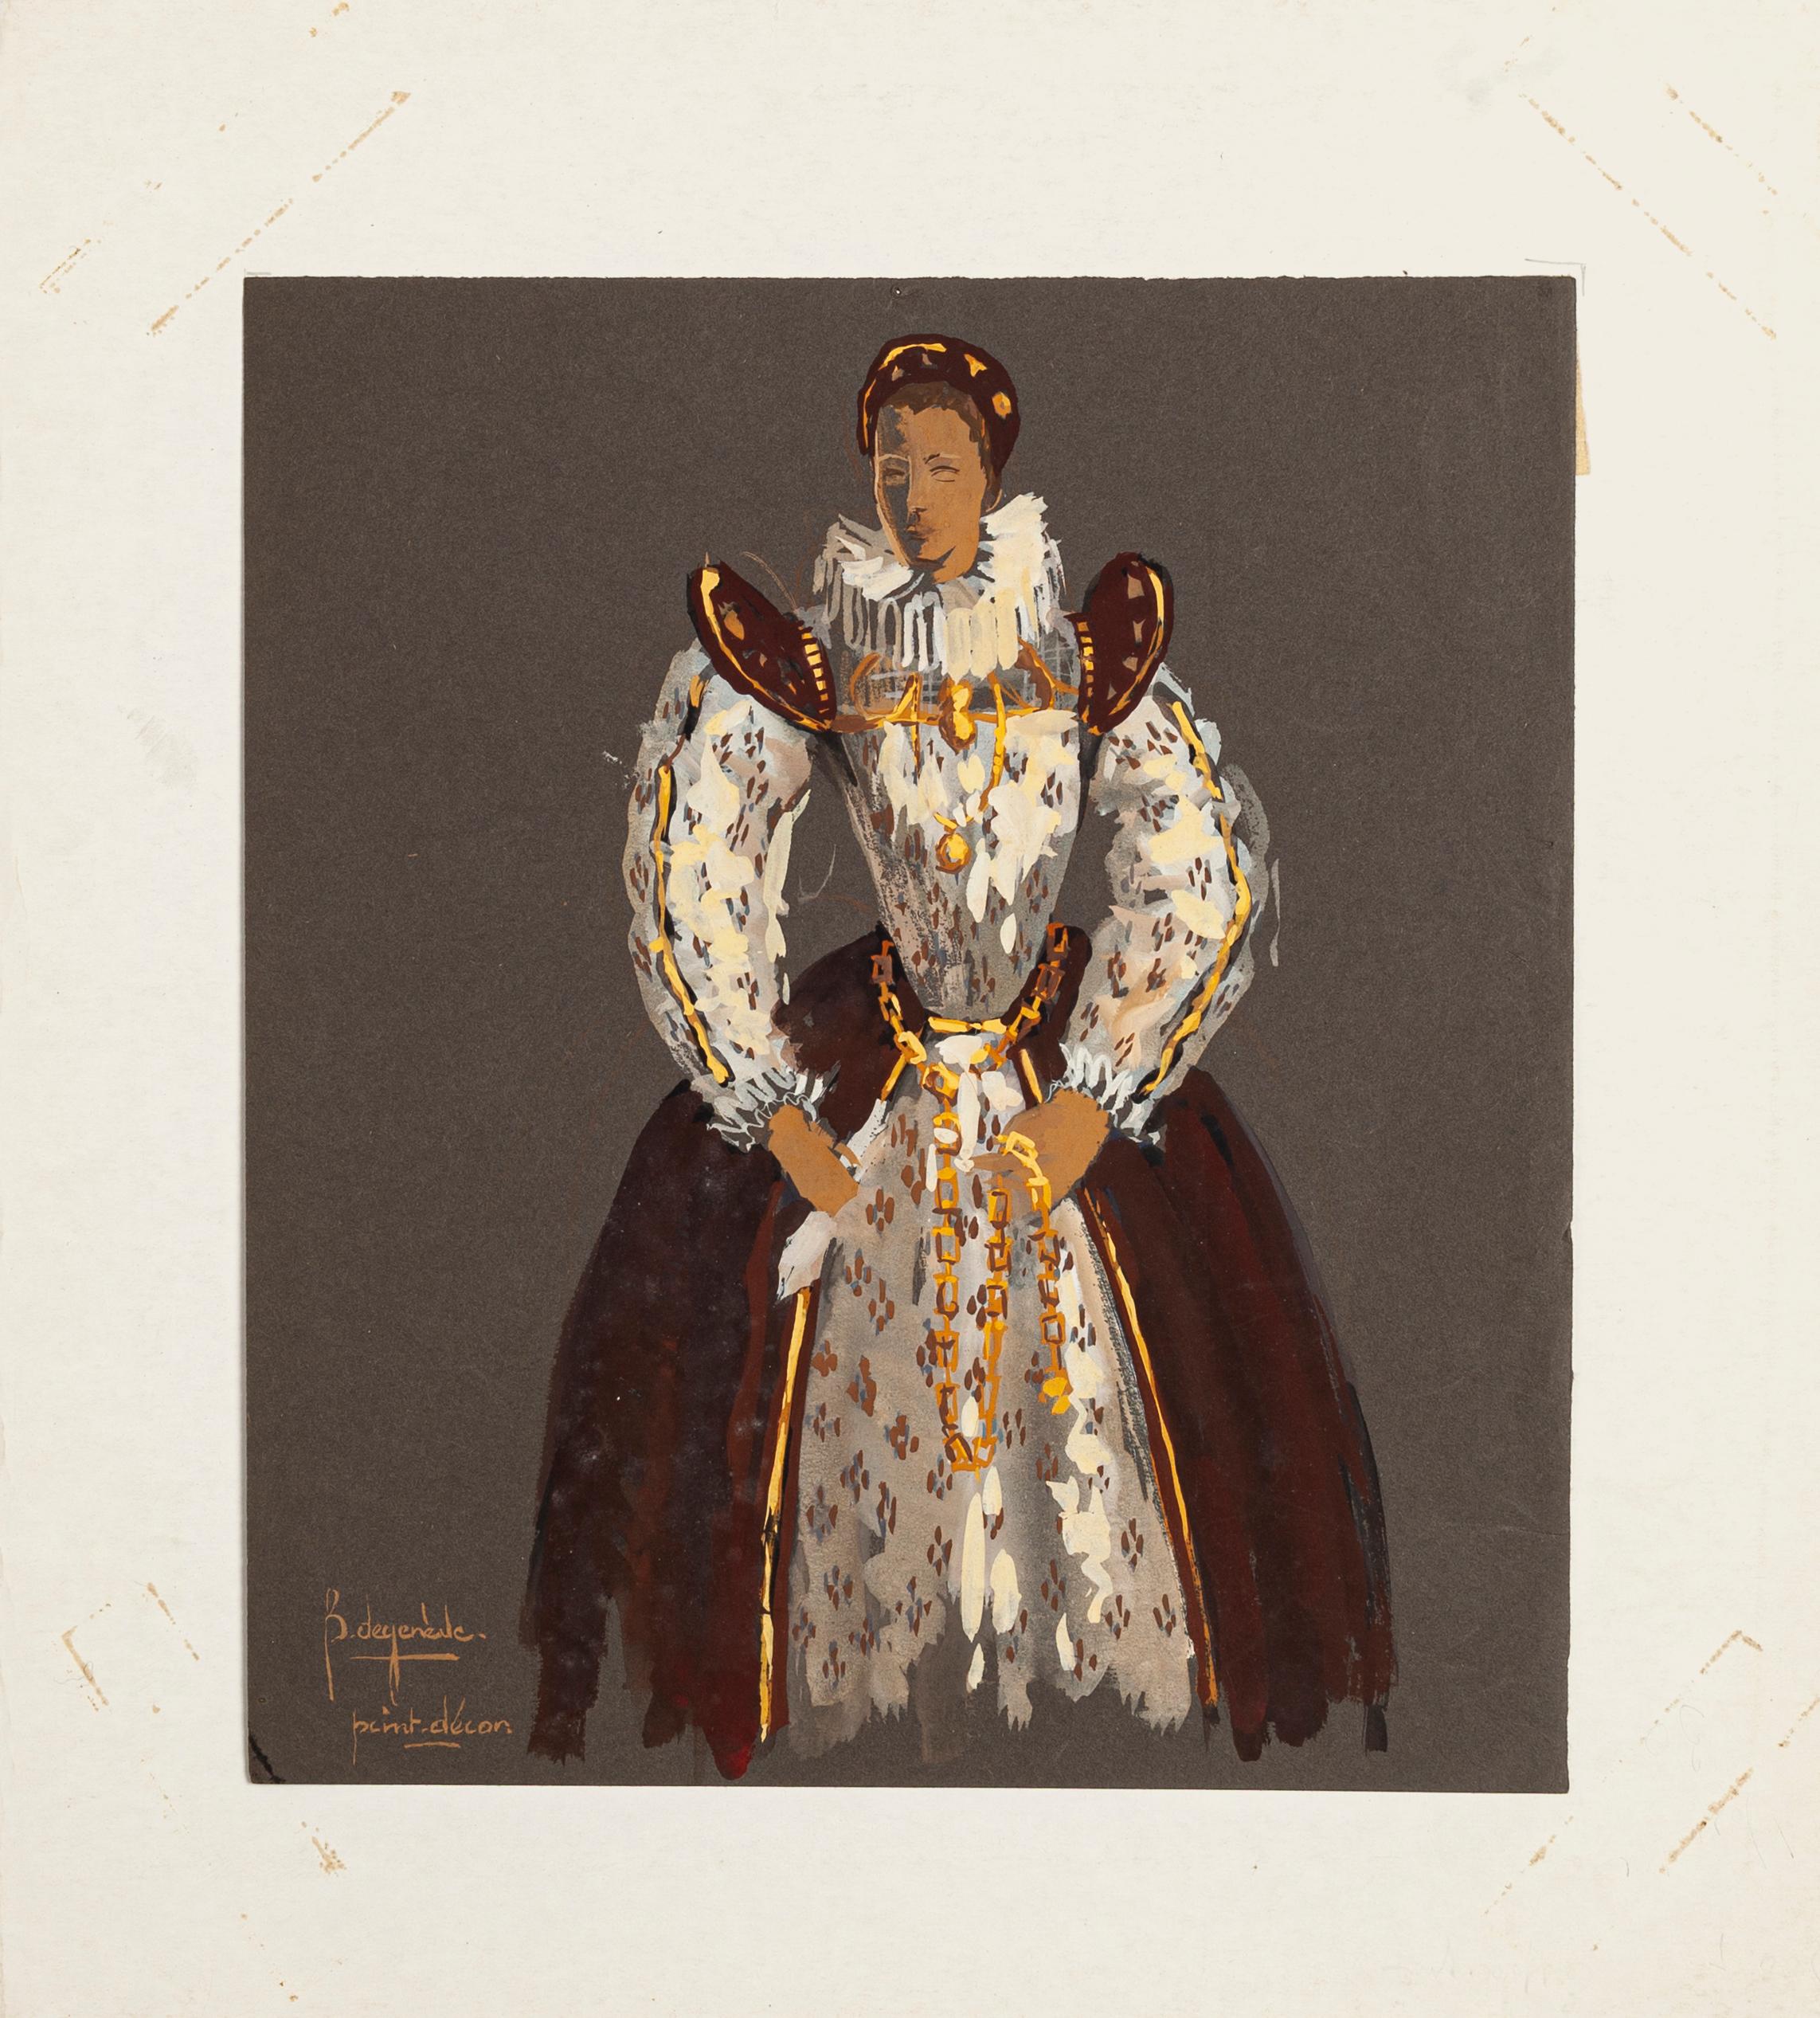 Study for Theatrical Costume - Original Tempera on Cardboard - Late 20th Century - Painting by Robert Degeneve